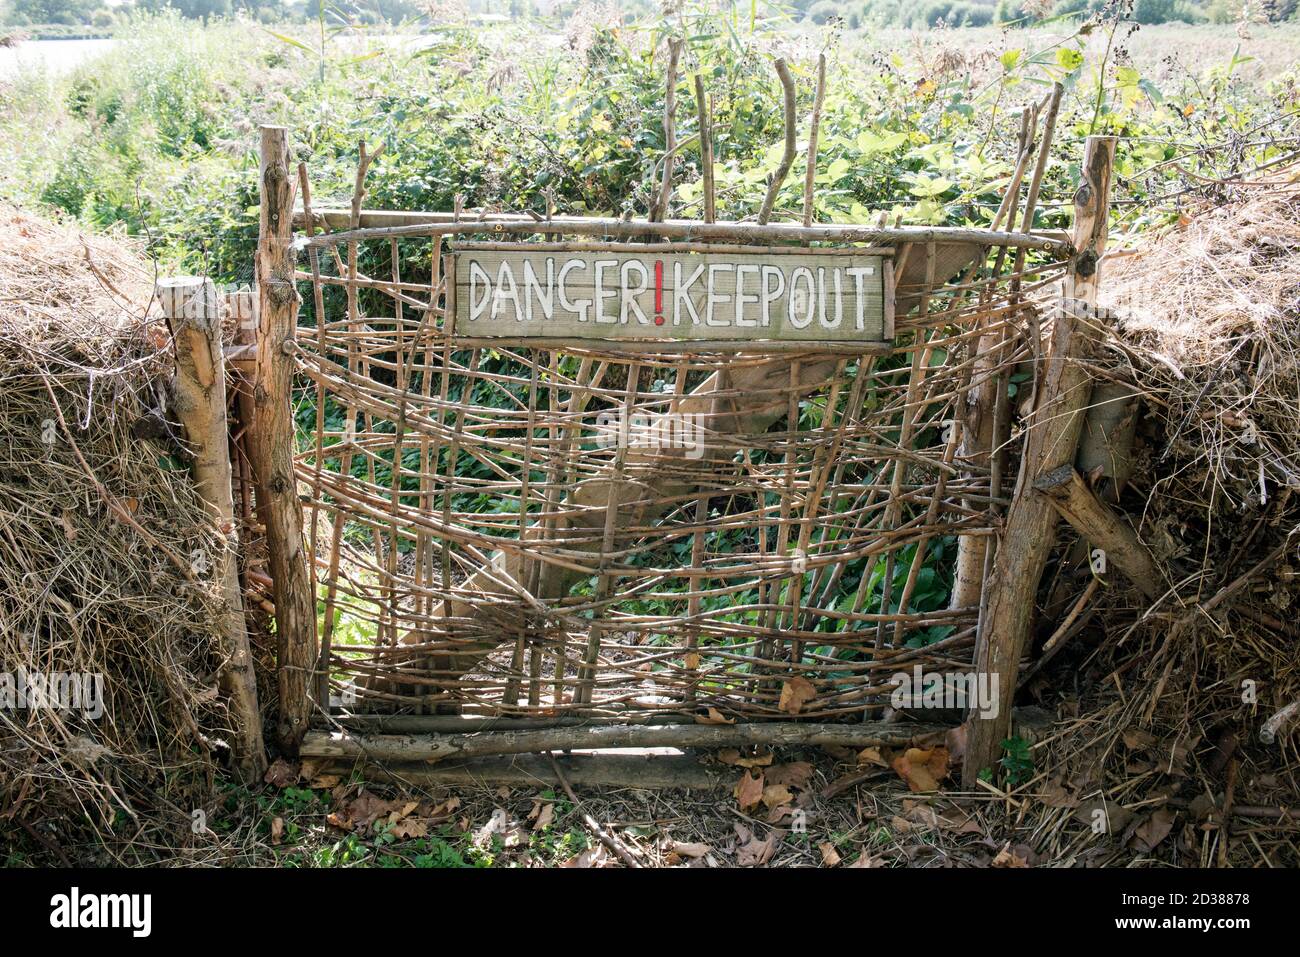 Rustic wicker gate with wooden - Danger Keep Out - sign, Woodberry Wetland urban nature reserve Stoke Newington London Borough of Hackney Stock Photo